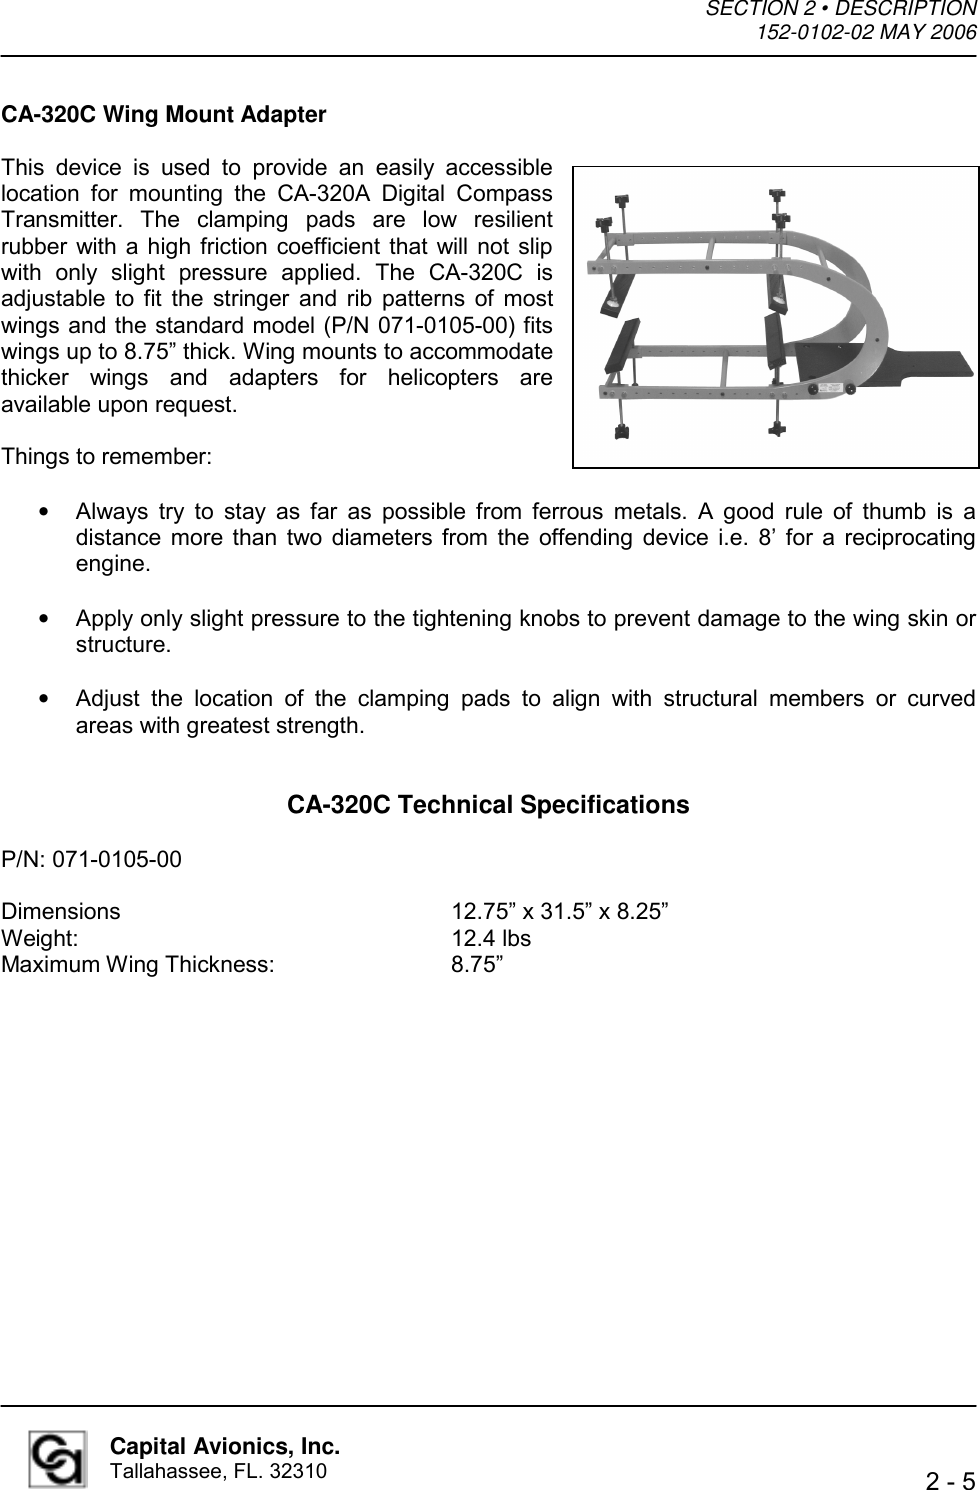 SECTION 2 • DESCRIPTION  152-0102-02 MAY 2006    2 - 5  Capital Avionics, Inc. Tallahassee, FL. 32310 CA-320C Wing Mount Adapter  This device is used to provide an easily accessible location for mounting the CA-320A Digital Compass Transmitter. The clamping pads are low resilient rubber with a high friction coefficient that will not slip with only slight pressure applied. The CA-320C is adjustable to fit the stringer and rib patterns of most wings and the standard model (P/N 071-0105-00) fits wings up to 8.75” thick. Wing mounts to accommodate thicker wings and adapters for helicopters are available upon request.    Things to remember:  •  Always try to stay as far as possible from ferrous metals. A good rule of thumb is a distance more than two diameters from the offending device i.e. 8’ for a reciprocating engine.   •  Apply only slight pressure to the tightening knobs to prevent damage to the wing skin or structure.   •  Adjust the location of the clamping pads to align with structural members or curved areas with greatest strength.   CA-320C Technical Specifications  P/N: 071-0105-00  Dimensions     12.75” x 31.5” x 8.25” Weight:      12.4 lbs Maximum Wing Thickness:   8.75” 